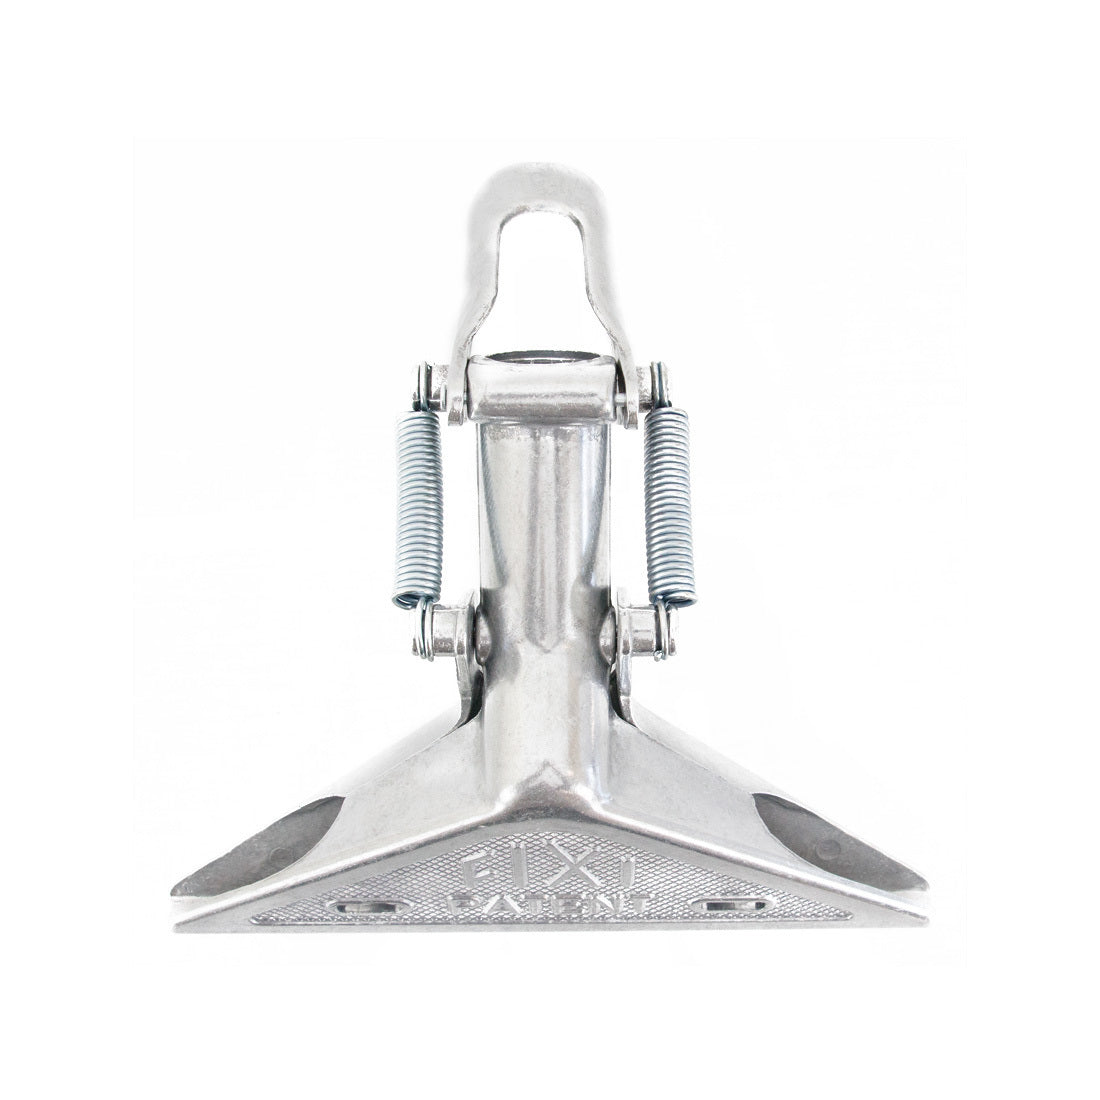 Pulex Multipurpose Clamp for Pole - Top View